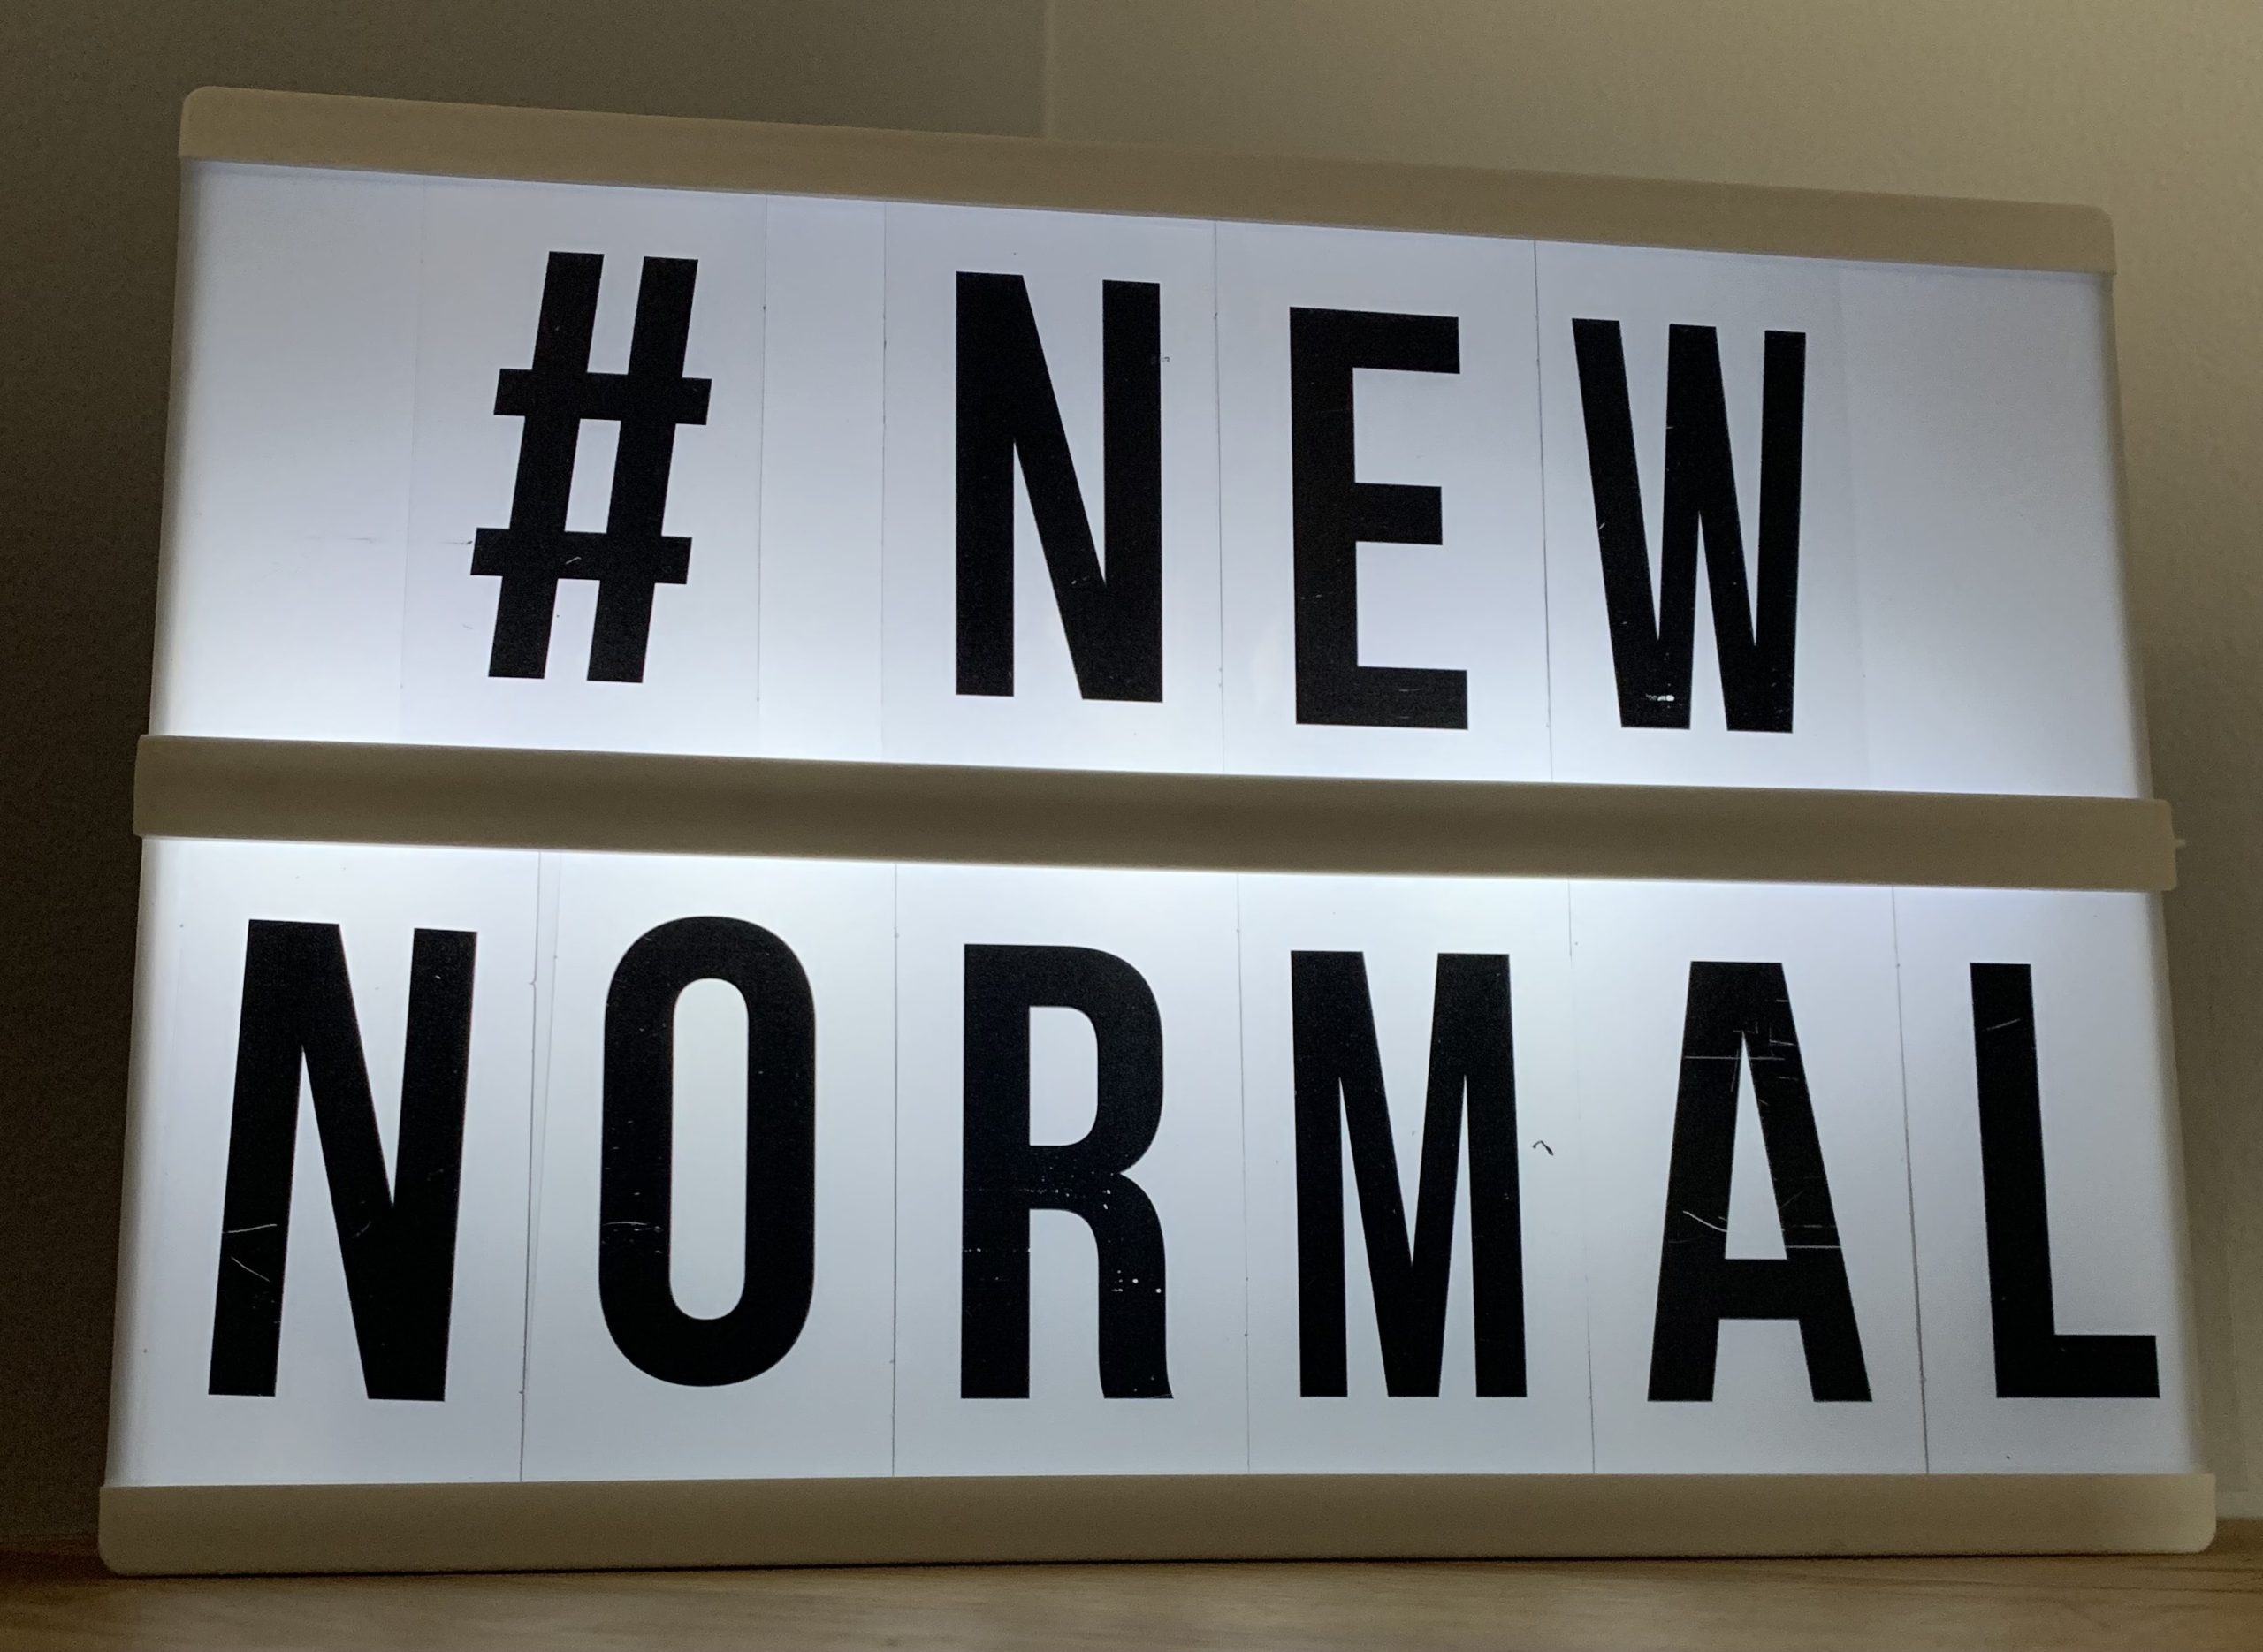 What is your “New Normal”?